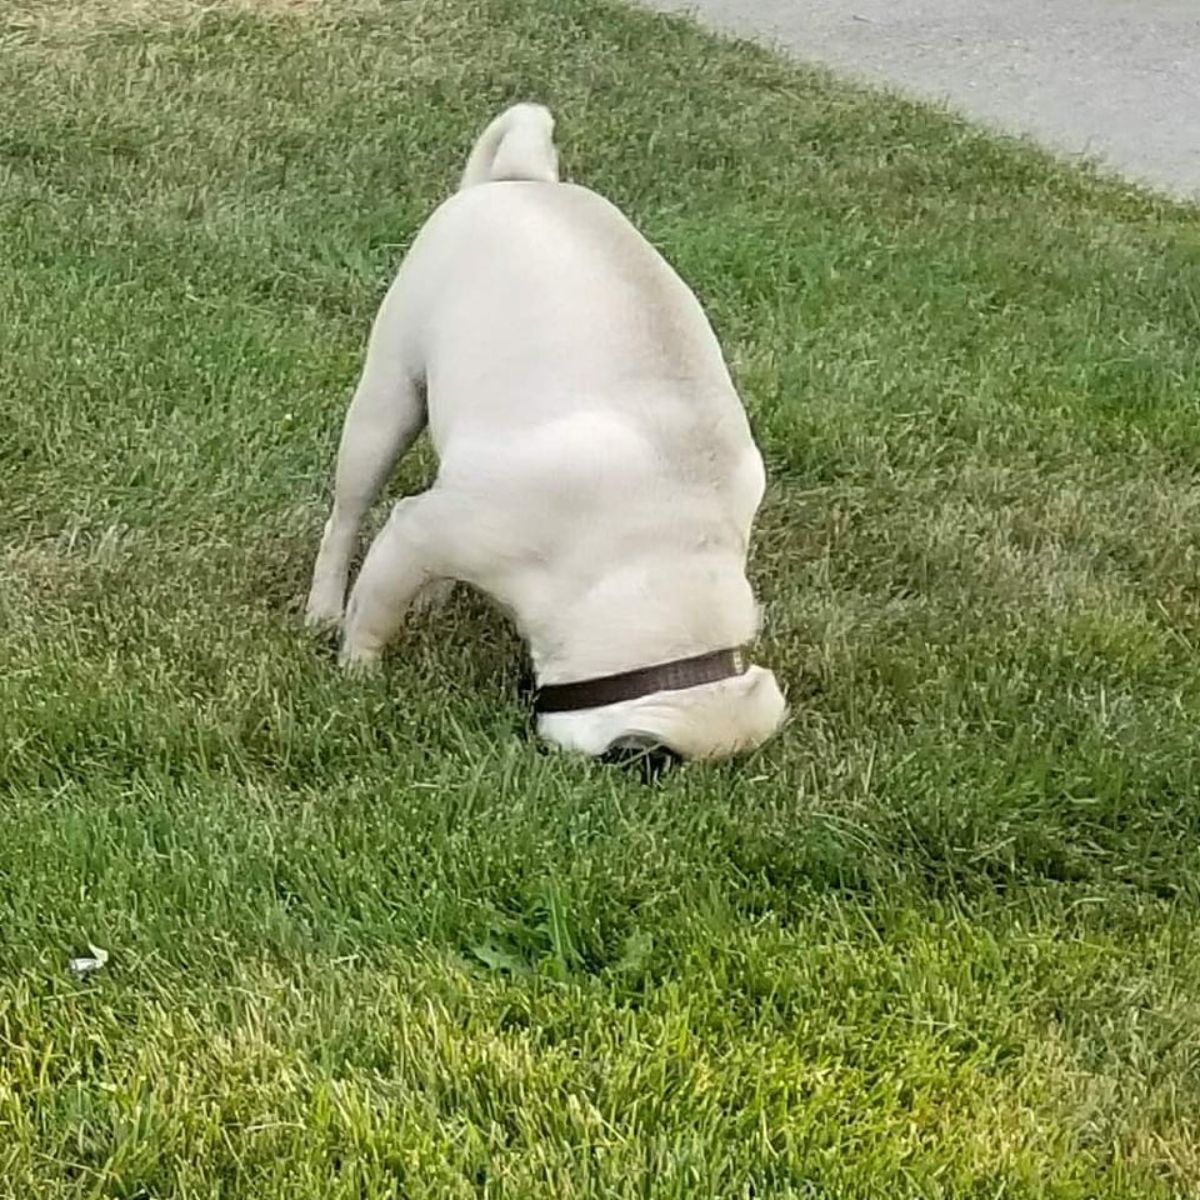 brown pug standing on grass with face smushed into the grass